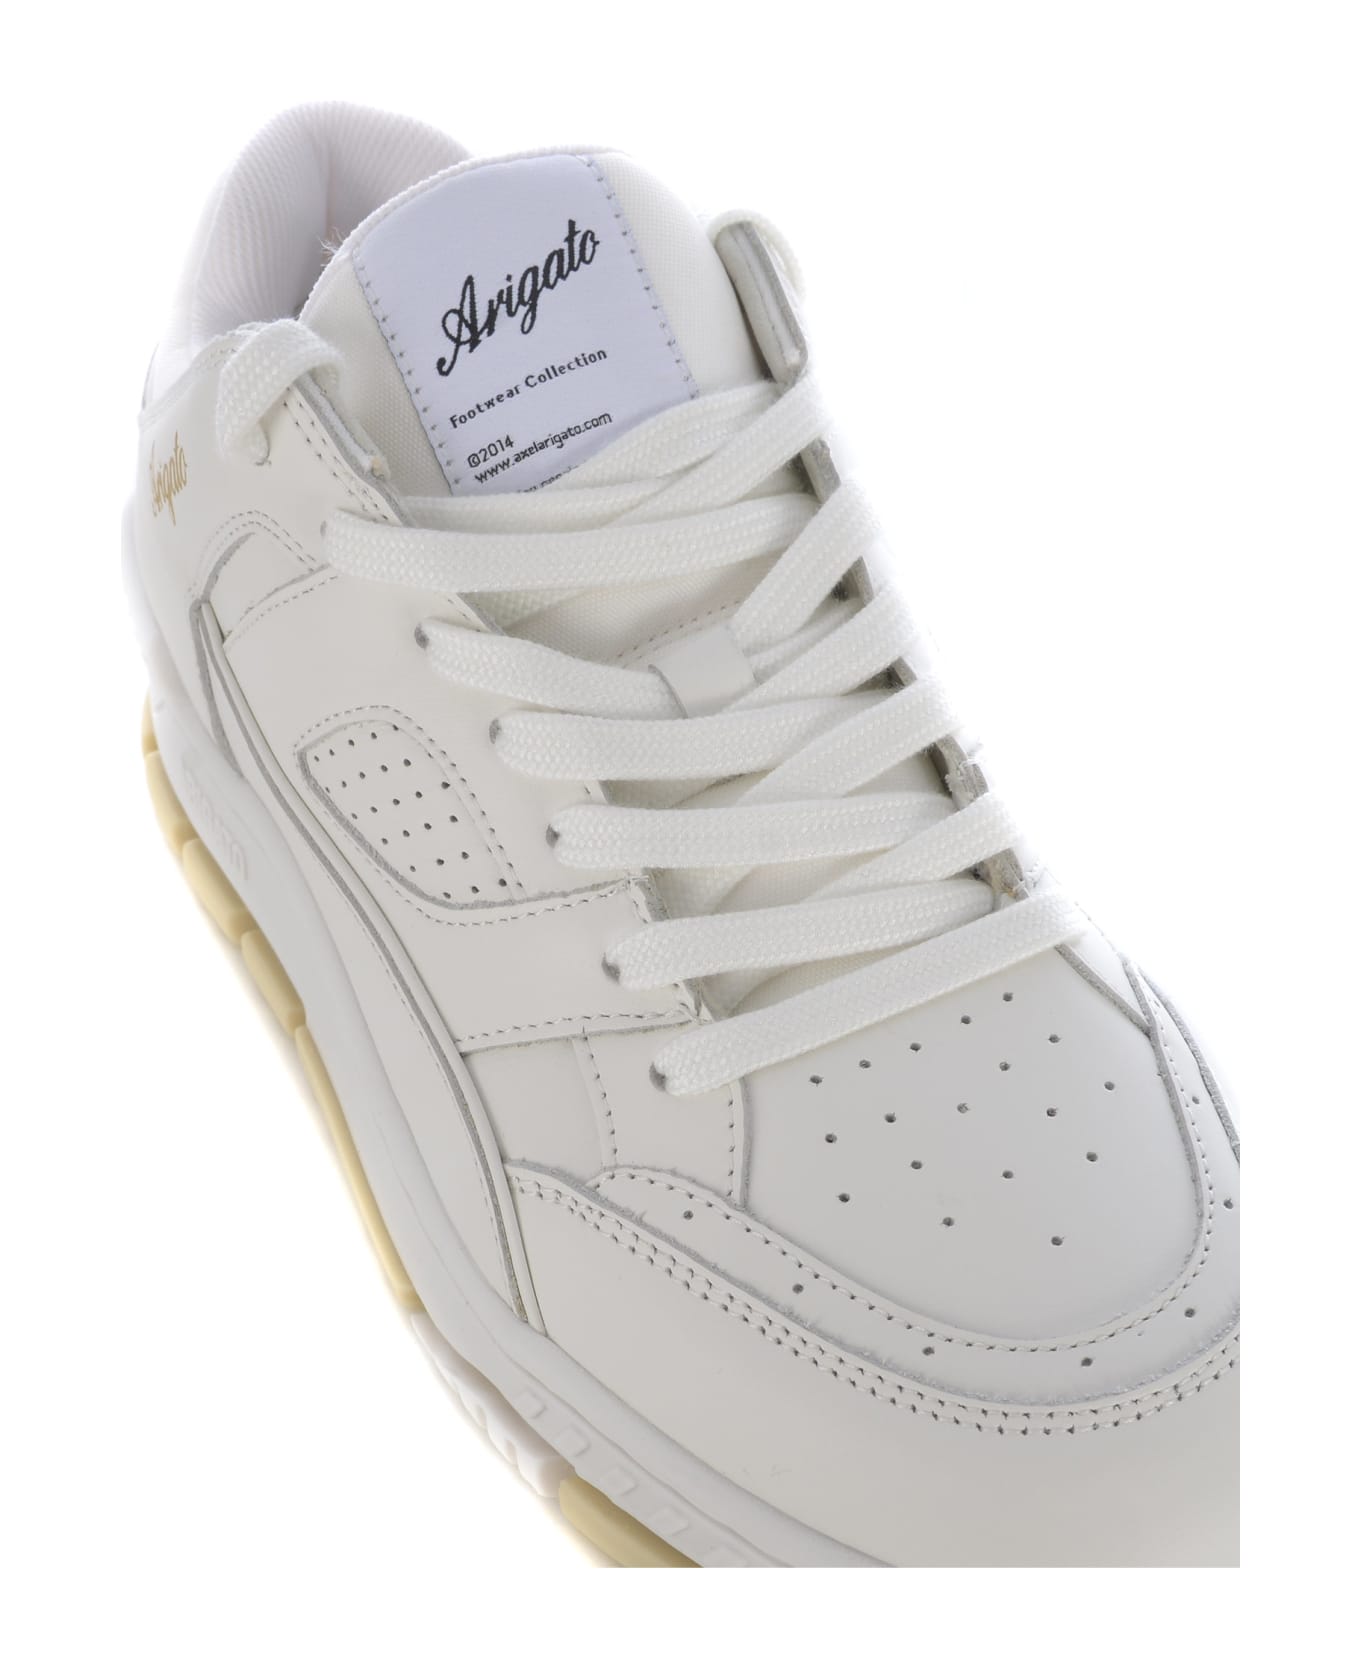 Axel Arigato Sneakers Axel Arigato "arealo" Made Of Leather - Bianco